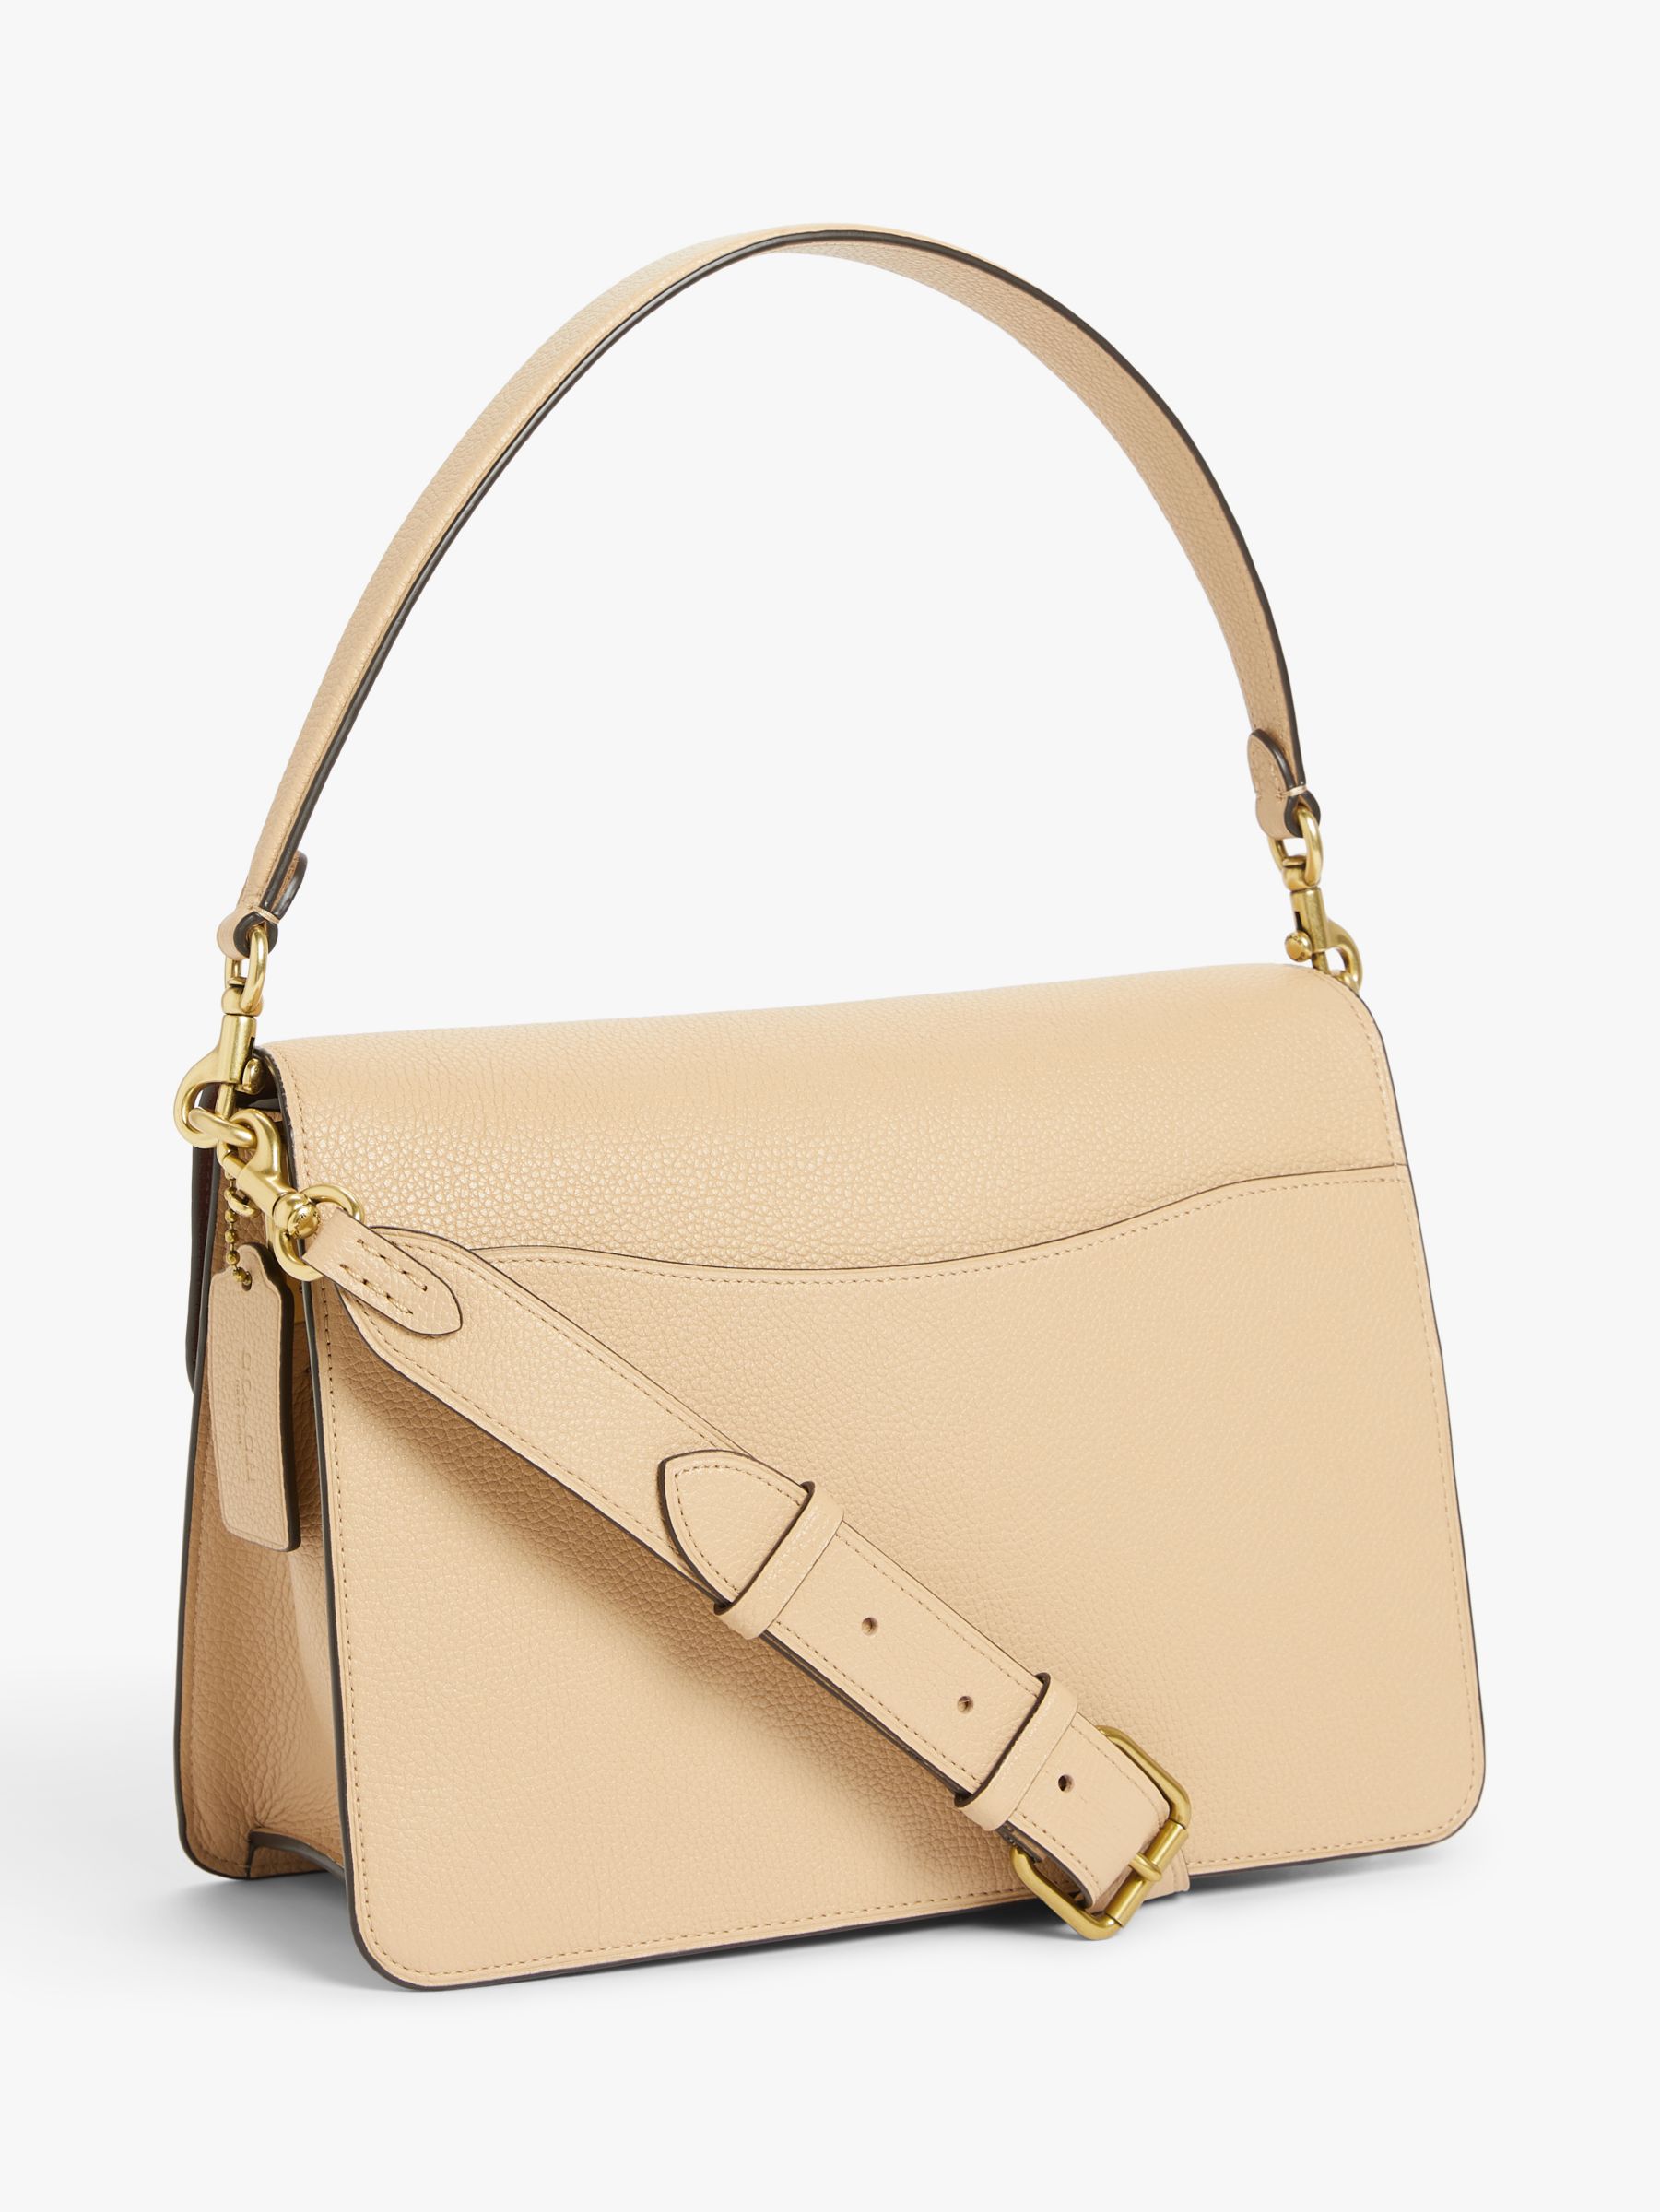 Coach Tabby Large Leather Shoulder Bag, Beechwood at John Lewis & Partners